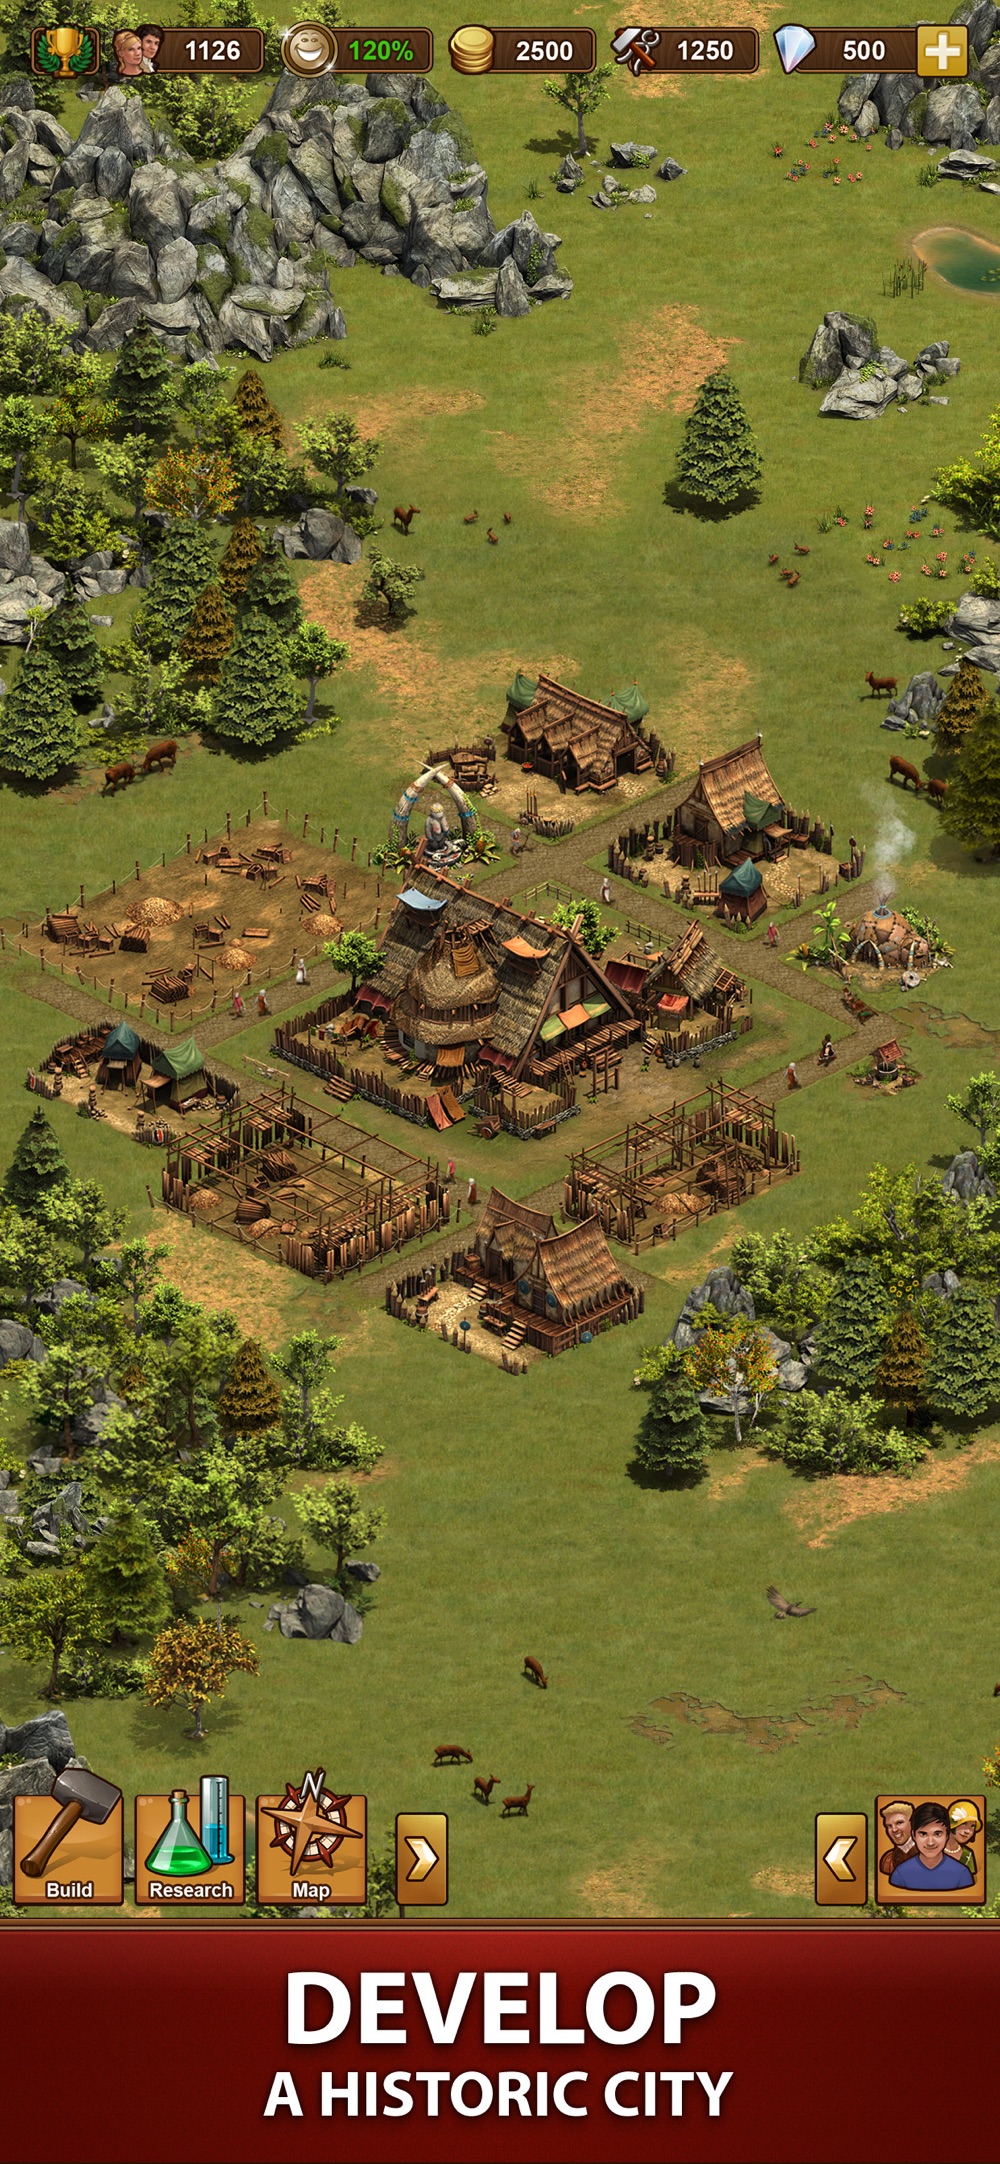 i need cheat codes for forge of empires